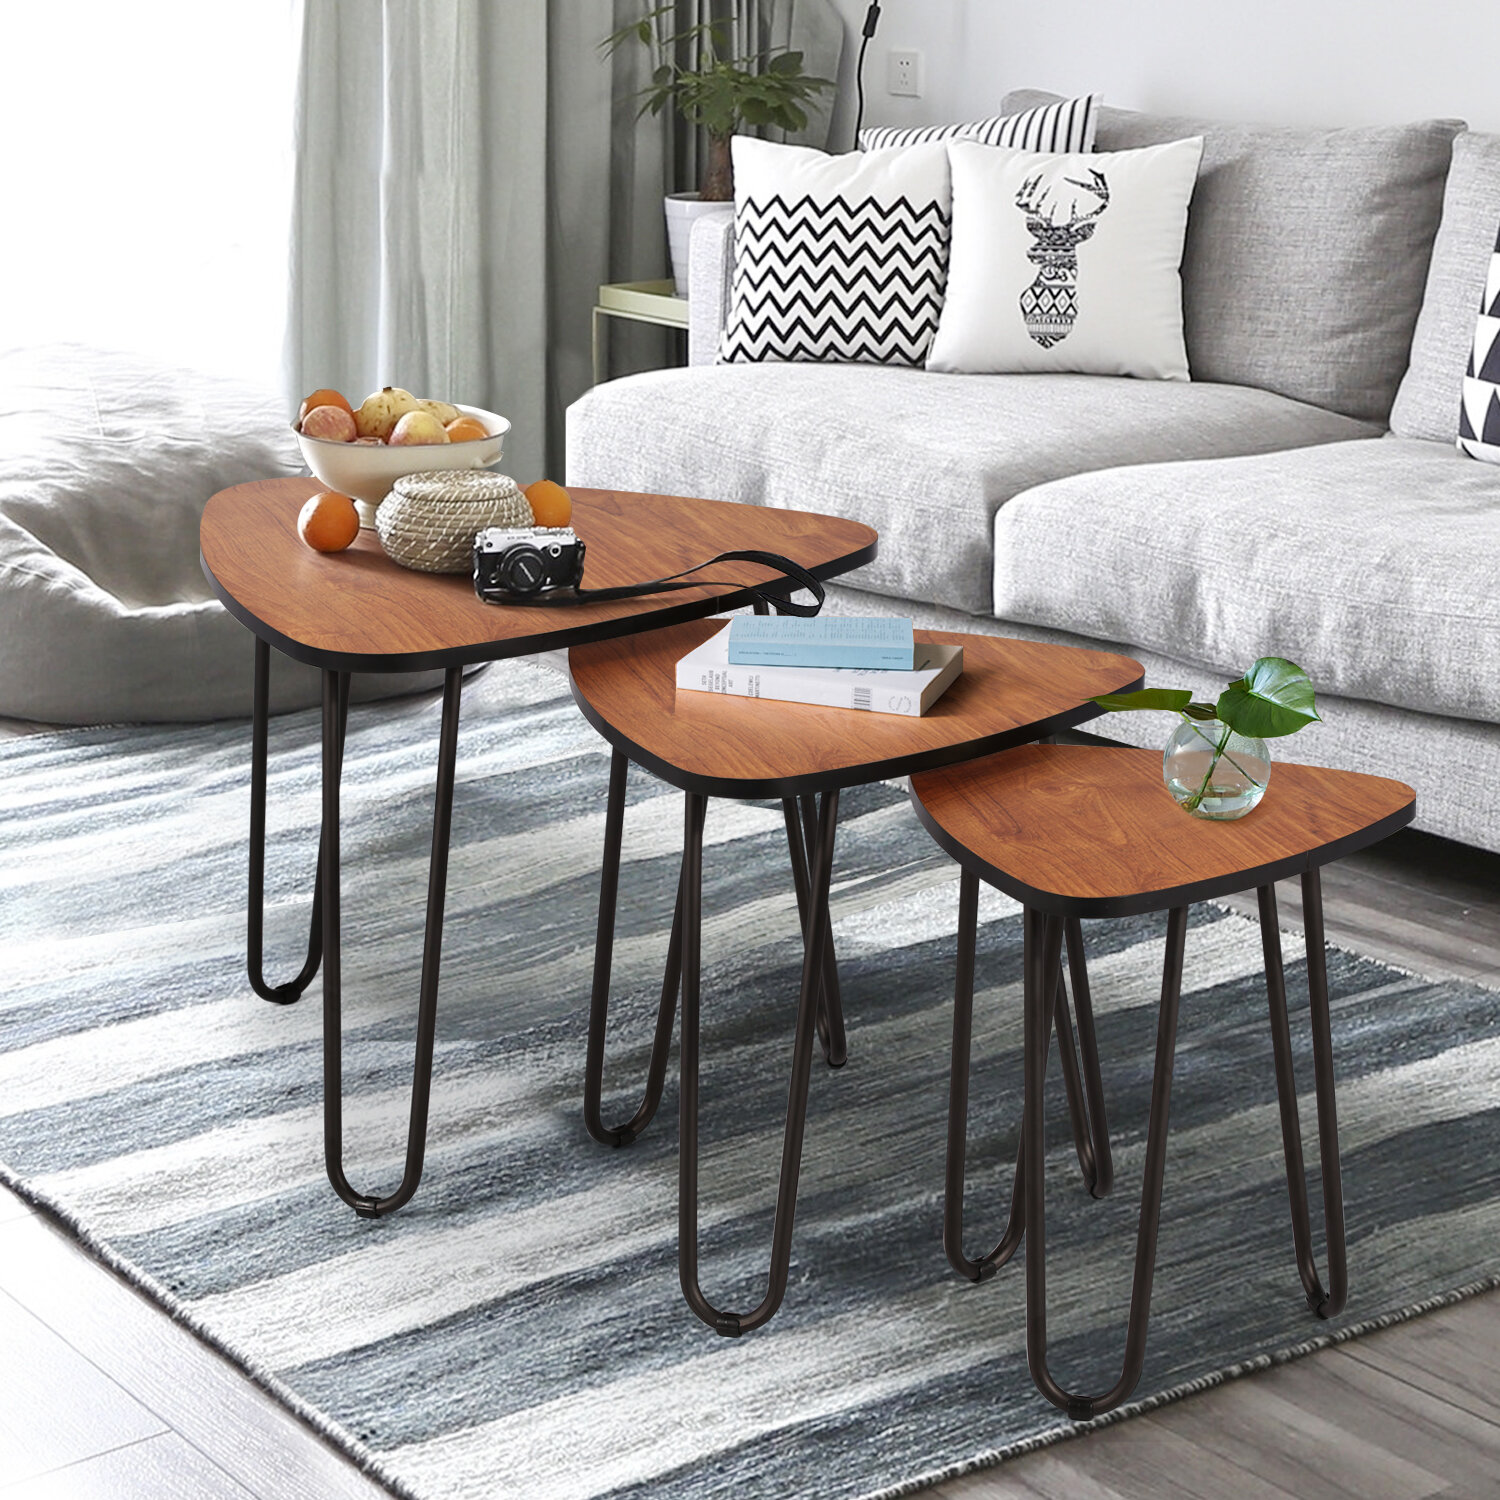 Coffee Tables Sets - Coffee And End Table Sets Ashley Furniture Homestore - Frequently asked coffee tables questions coffee tables by ashley homestore with a wide variety of styles and materials, coffee tables from ashley homestore are a great option if you need durability and versatility.